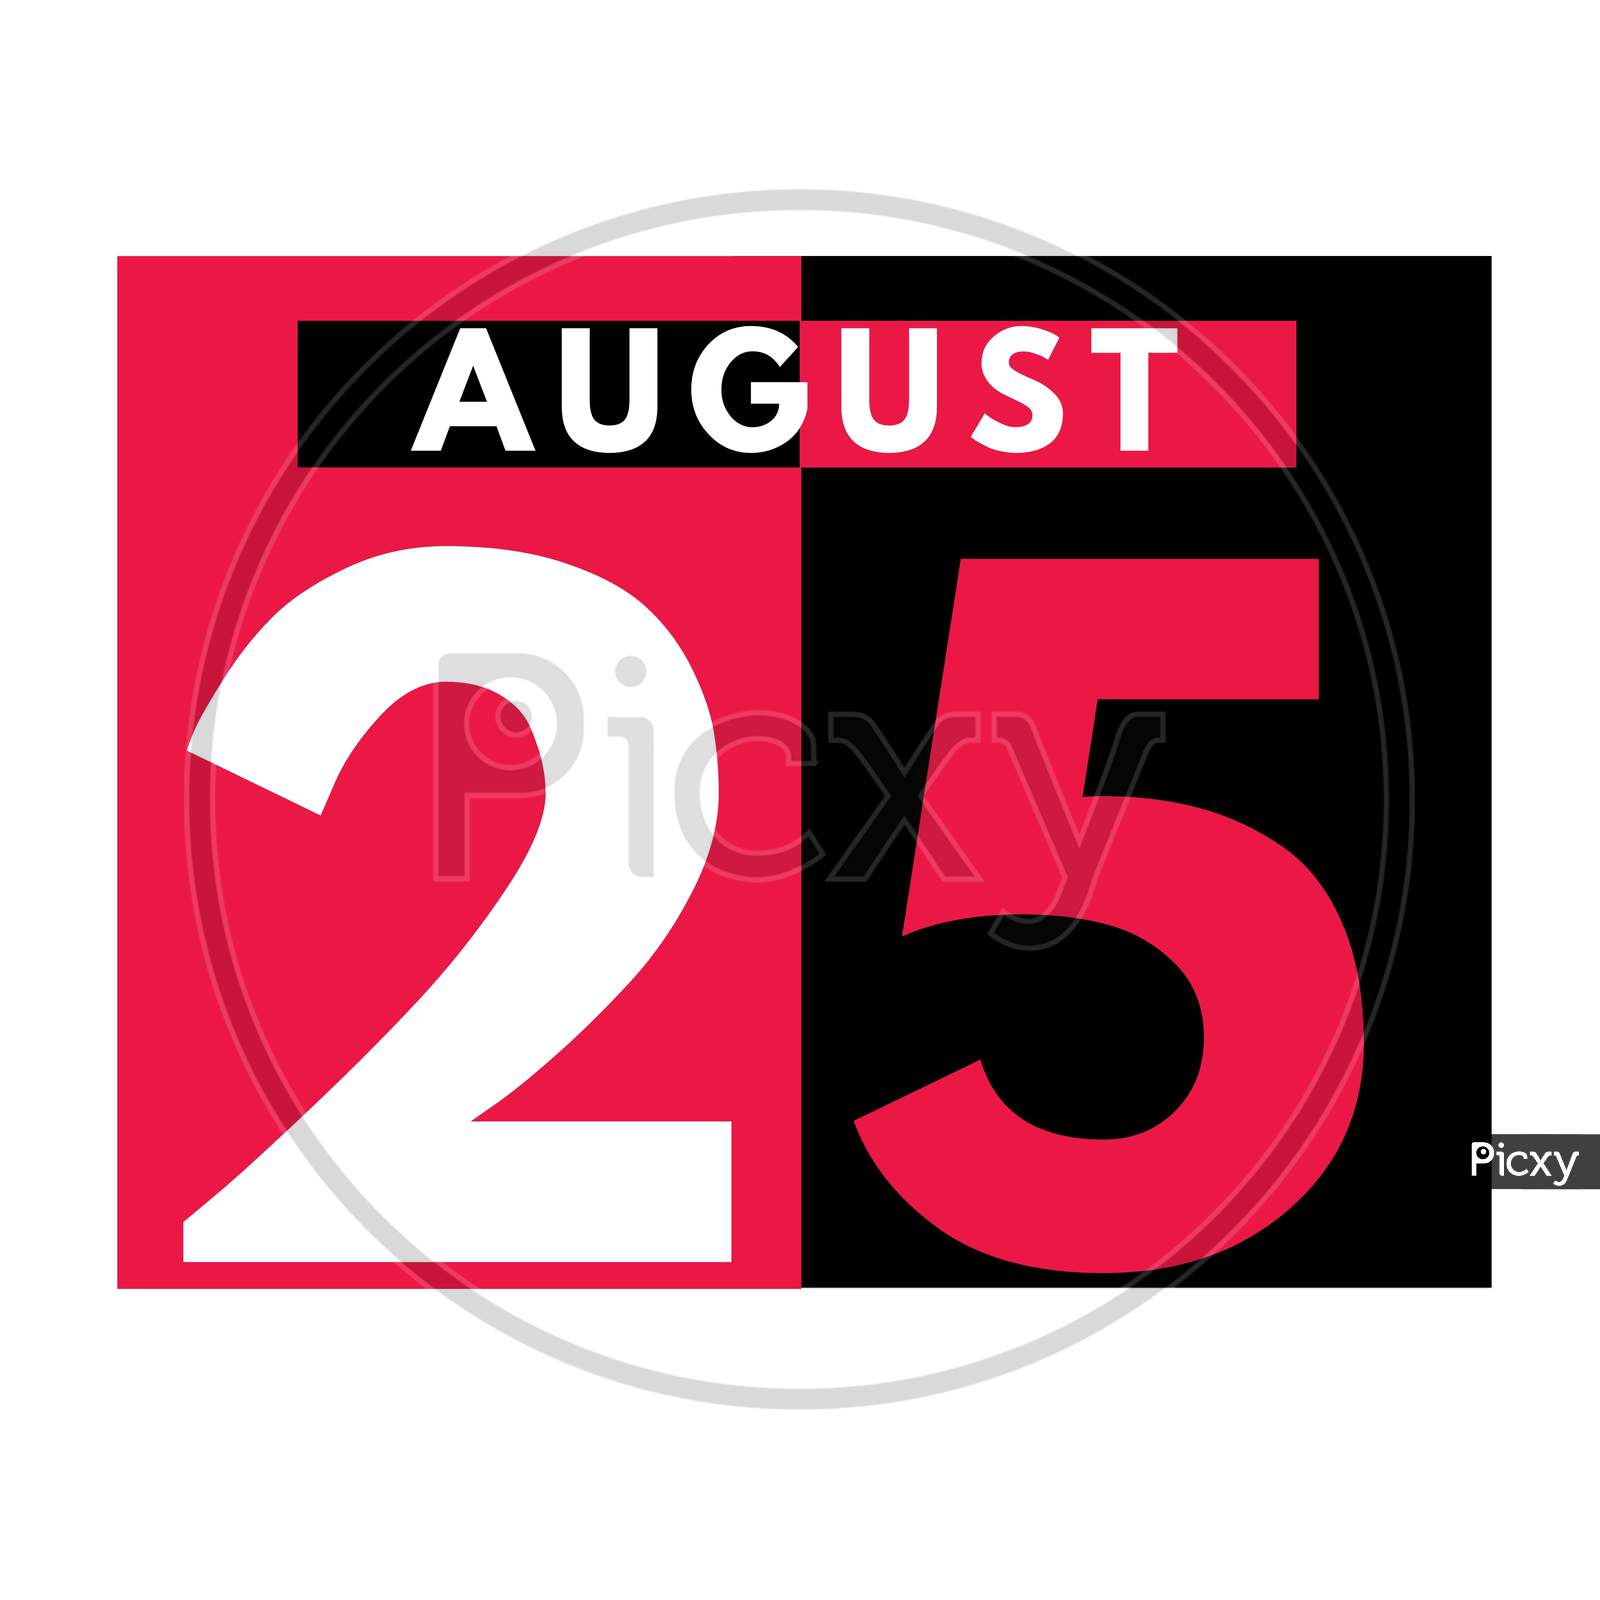 August 25 . Modern Daily Calendar Icon .Date ,Day, Month .Calendar For The Month Of August